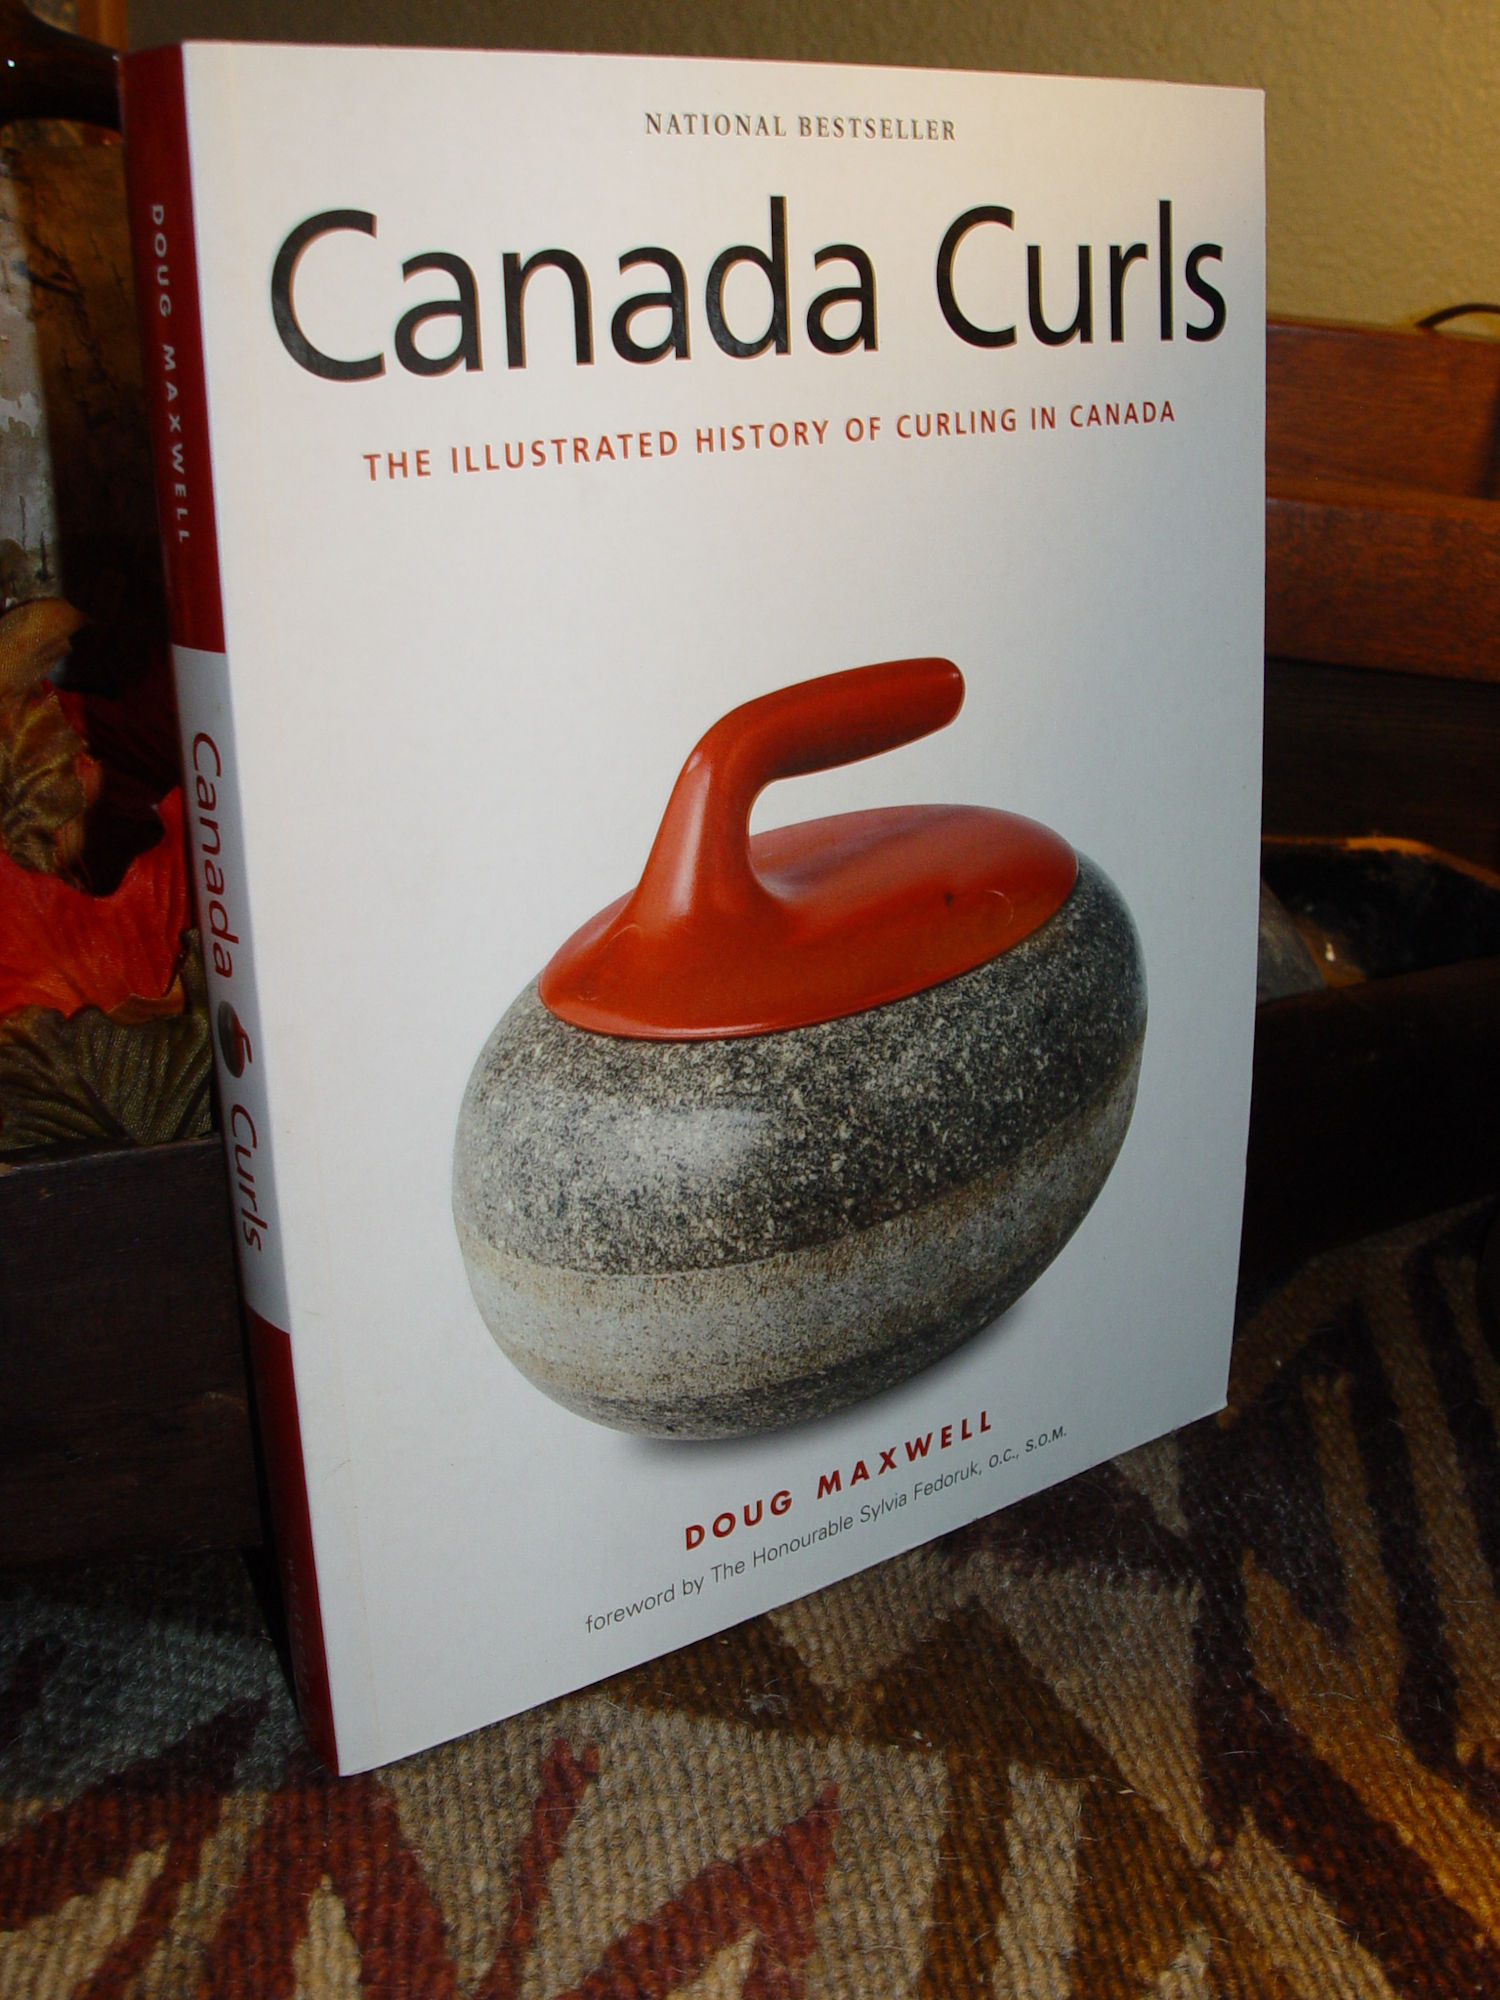 Canada Curls: The Illustrated History of
                        Curling in Canada 2002, by Doug Maxwell